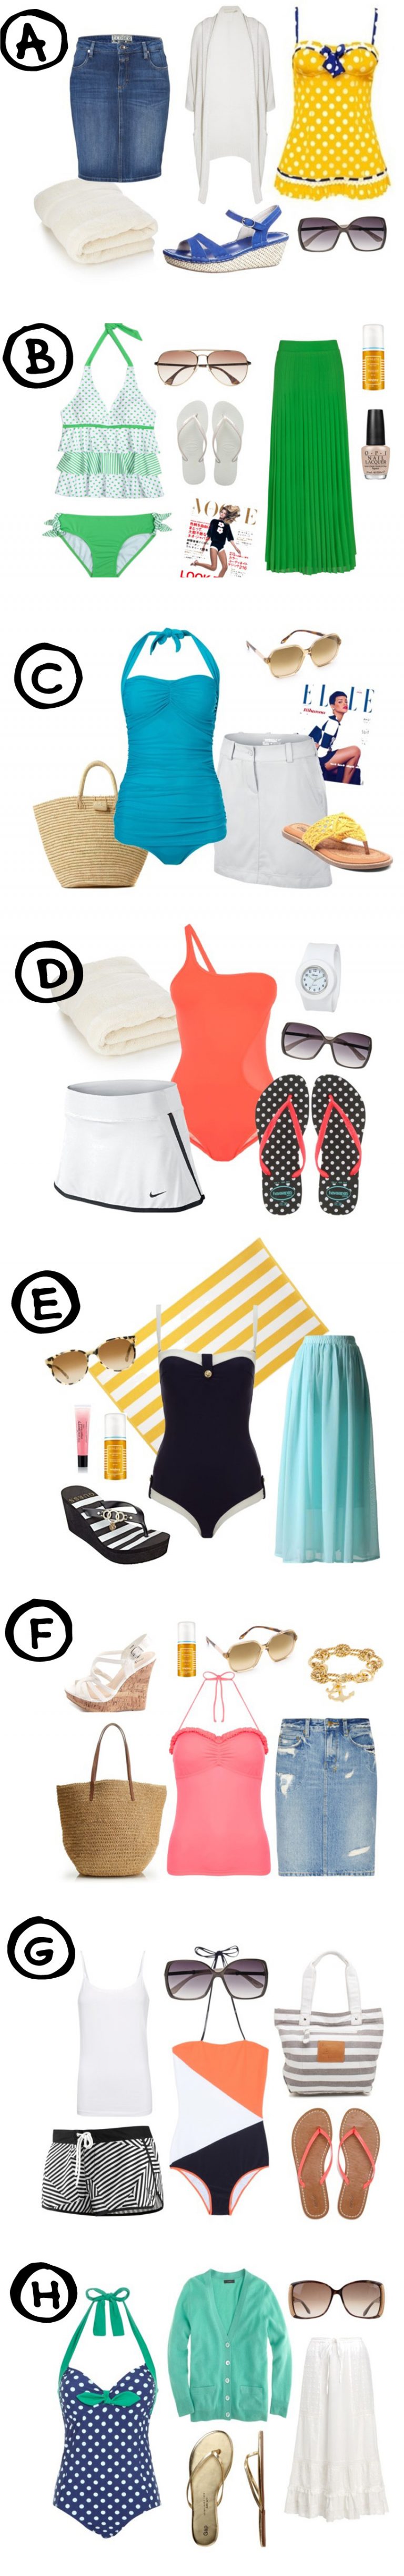 8 Modest Swimsuits Summer Outfits